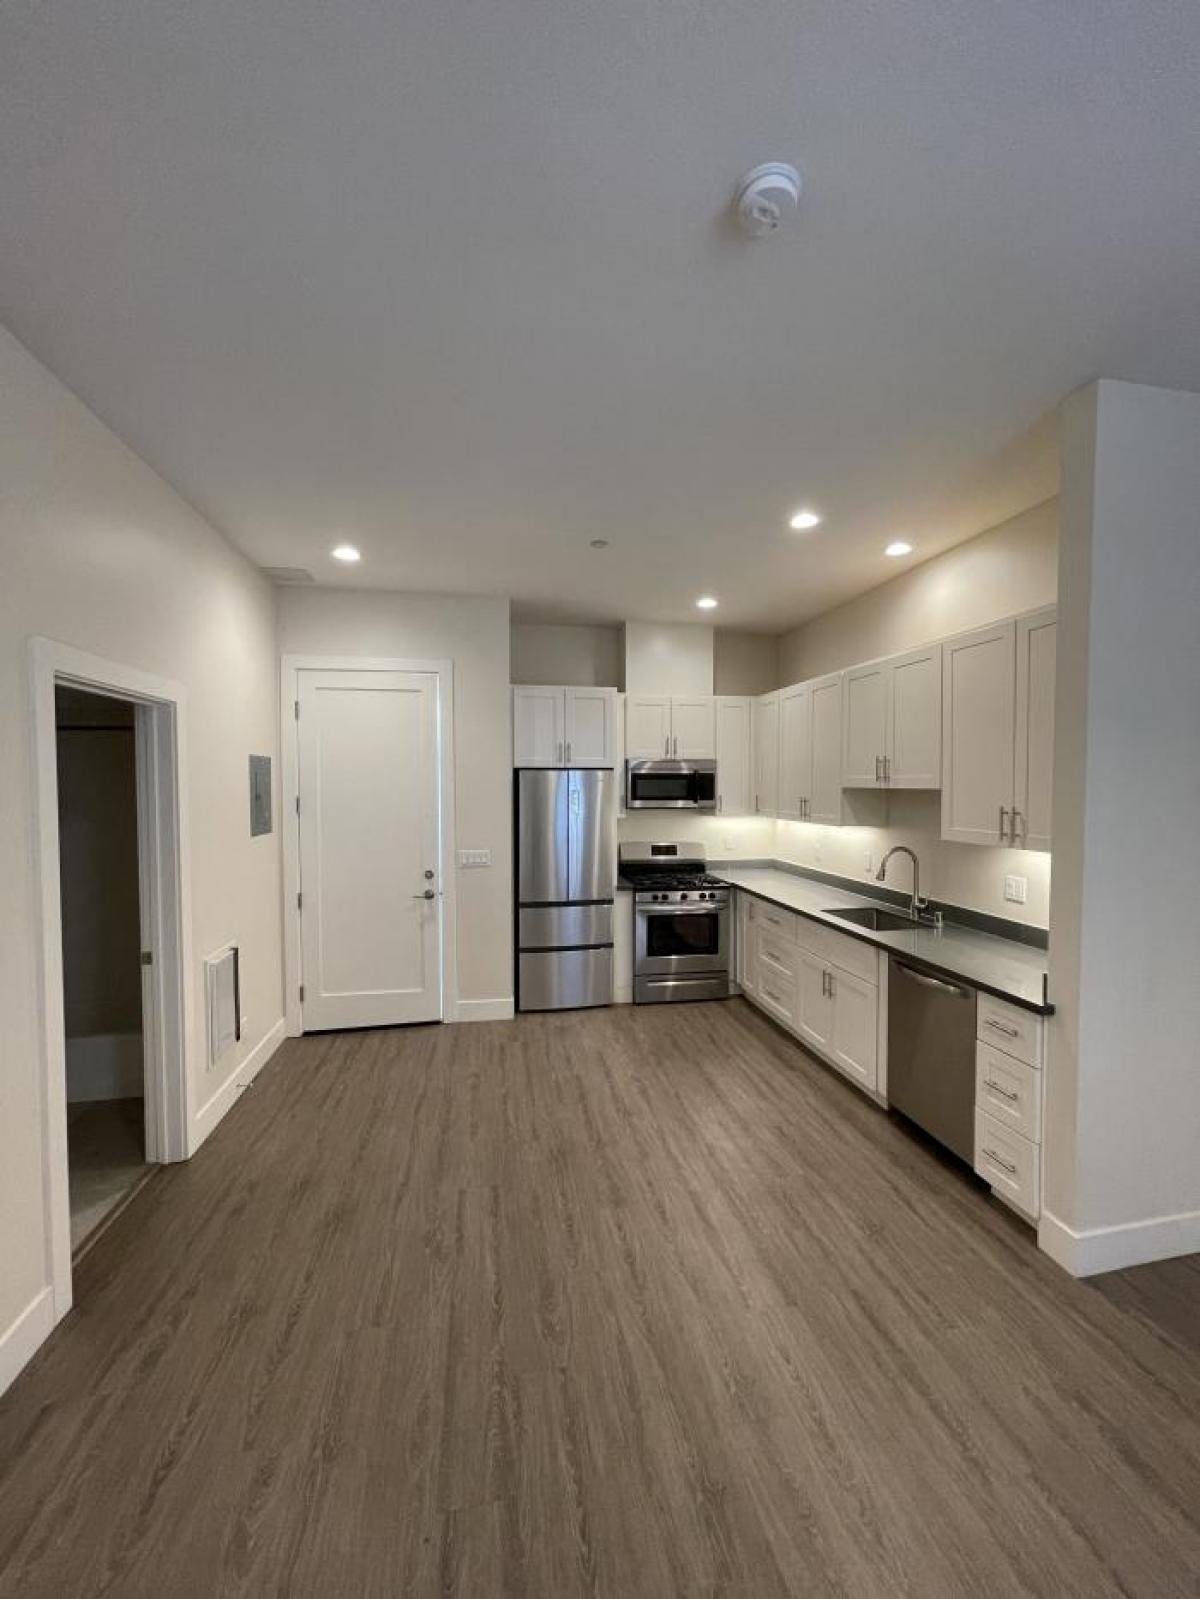 Picture of Apartment For Rent in Hayward, California, United States